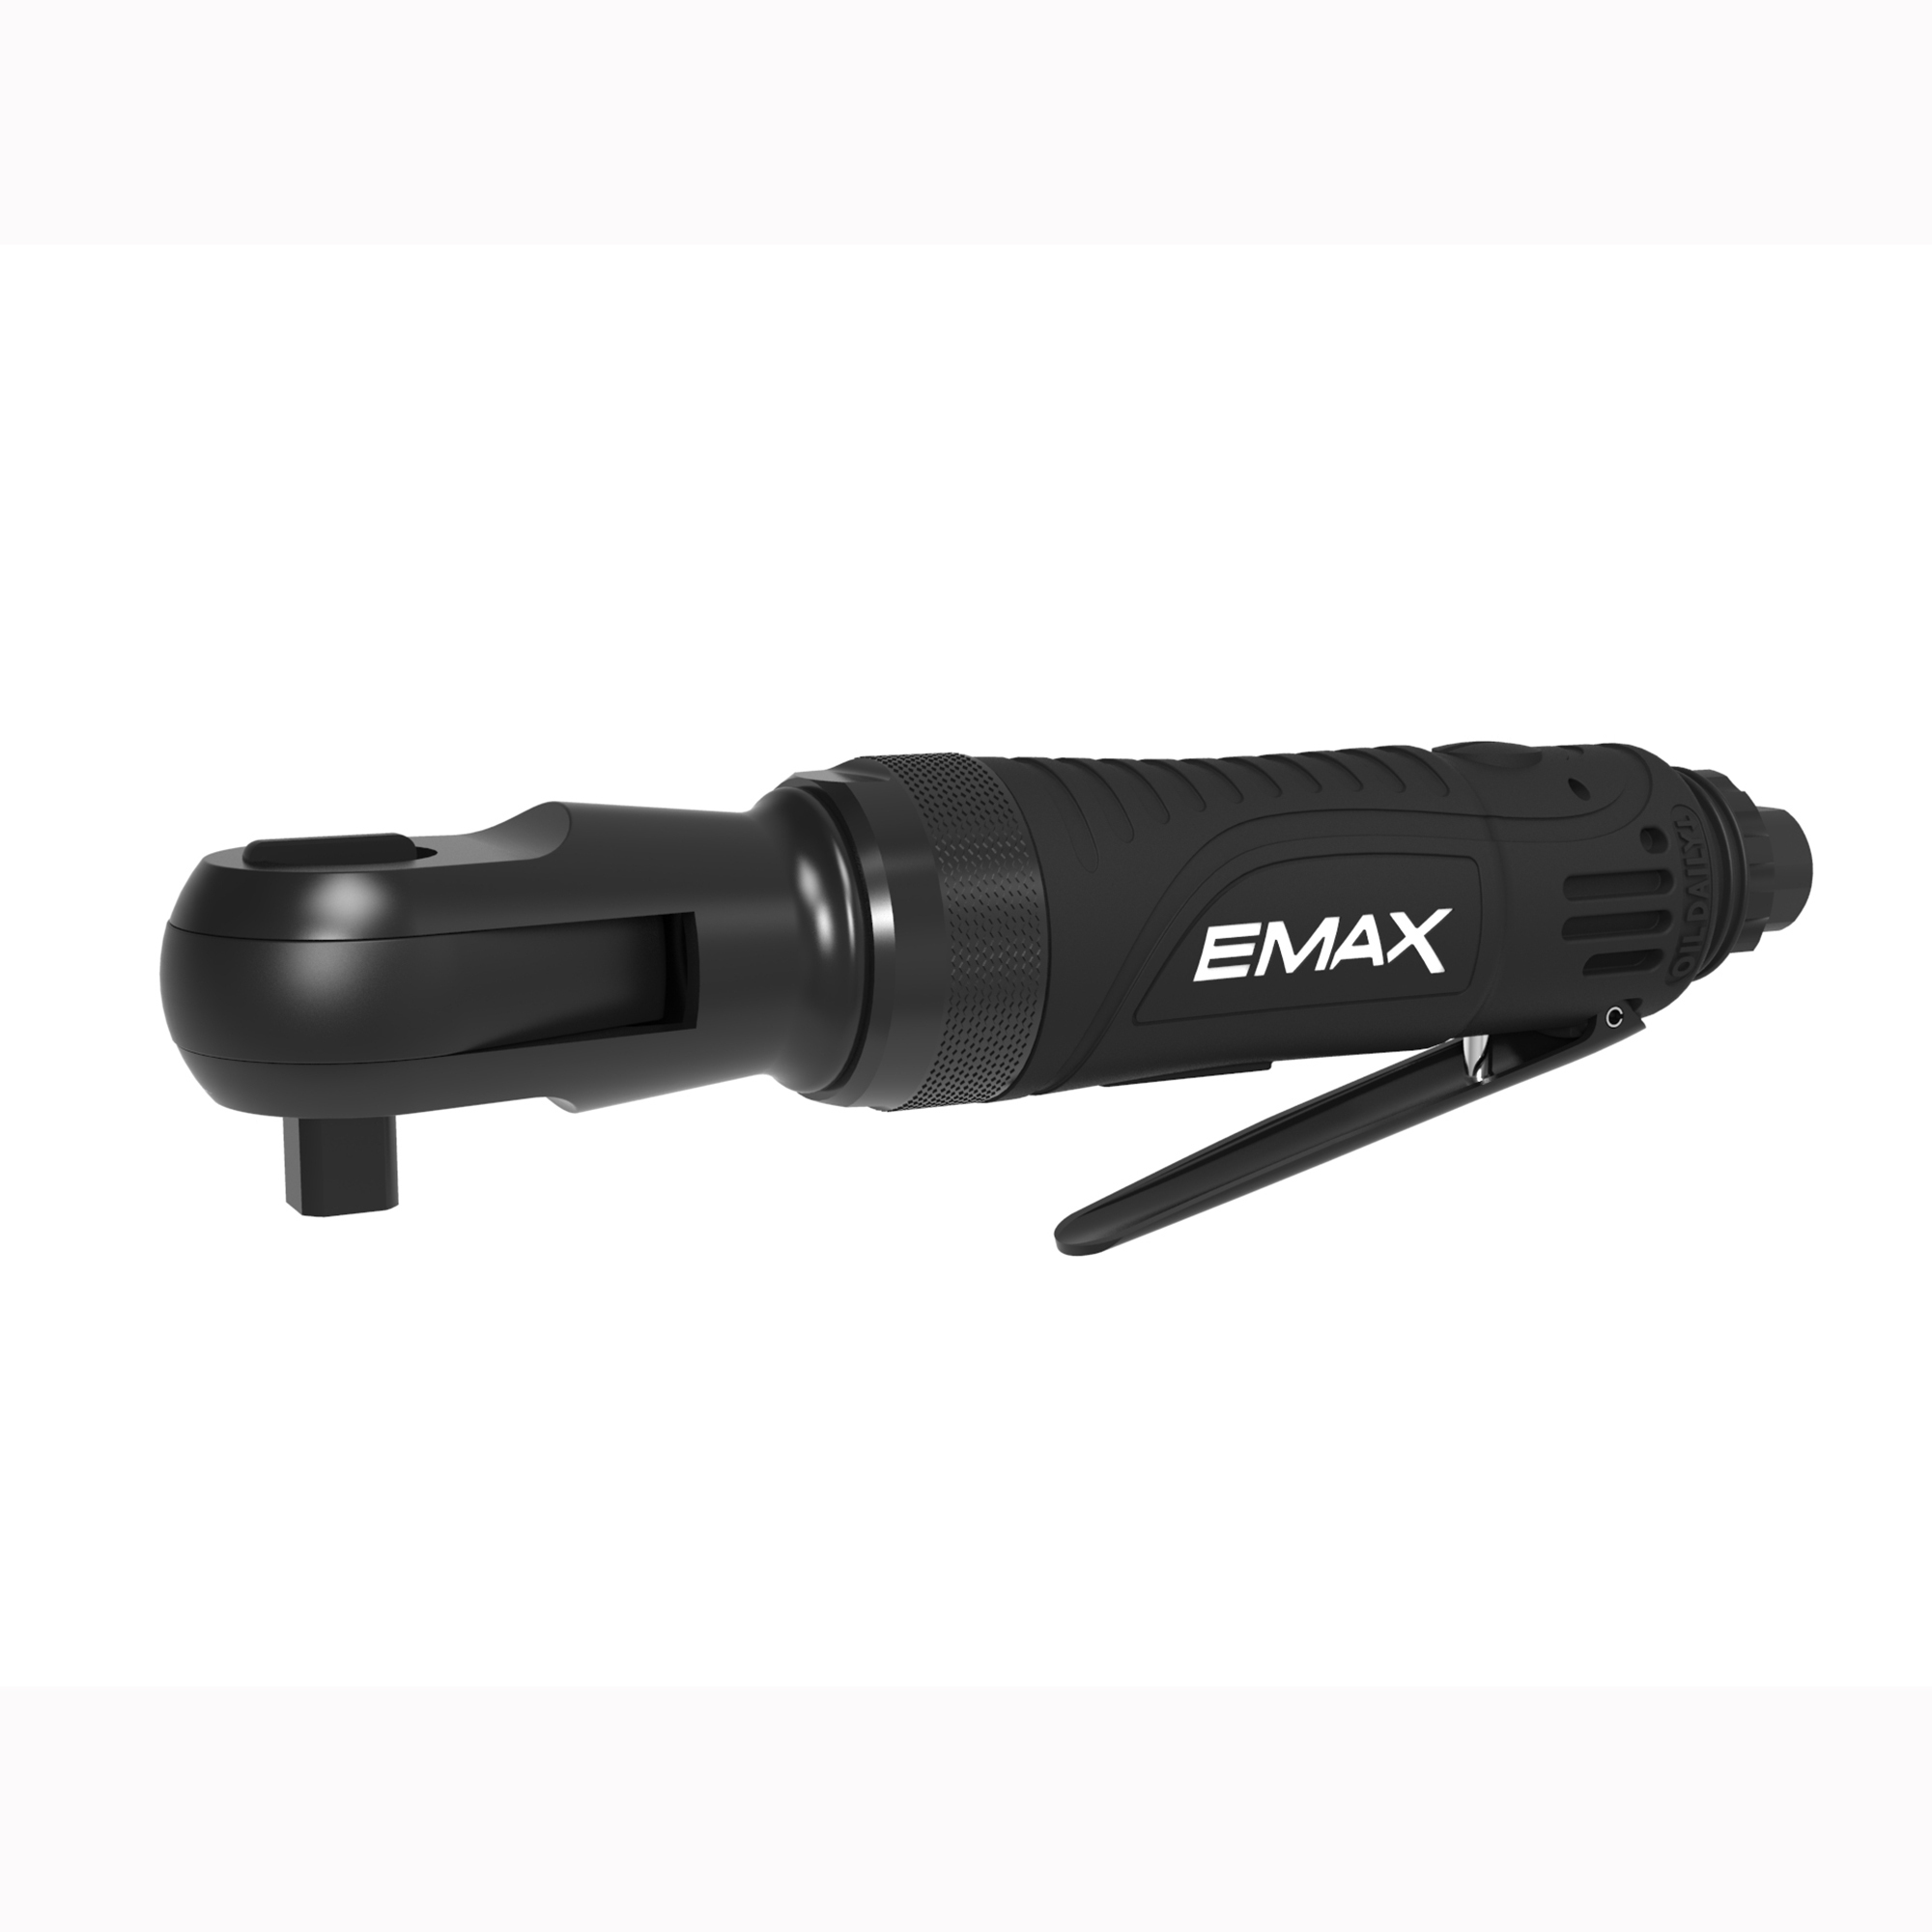 Emax, Composite 3/8Inch Air Ratchet Wrench, Drive Size 3/8 in, Max. Torque 60 ft-lbs., Model EATRT03S1P